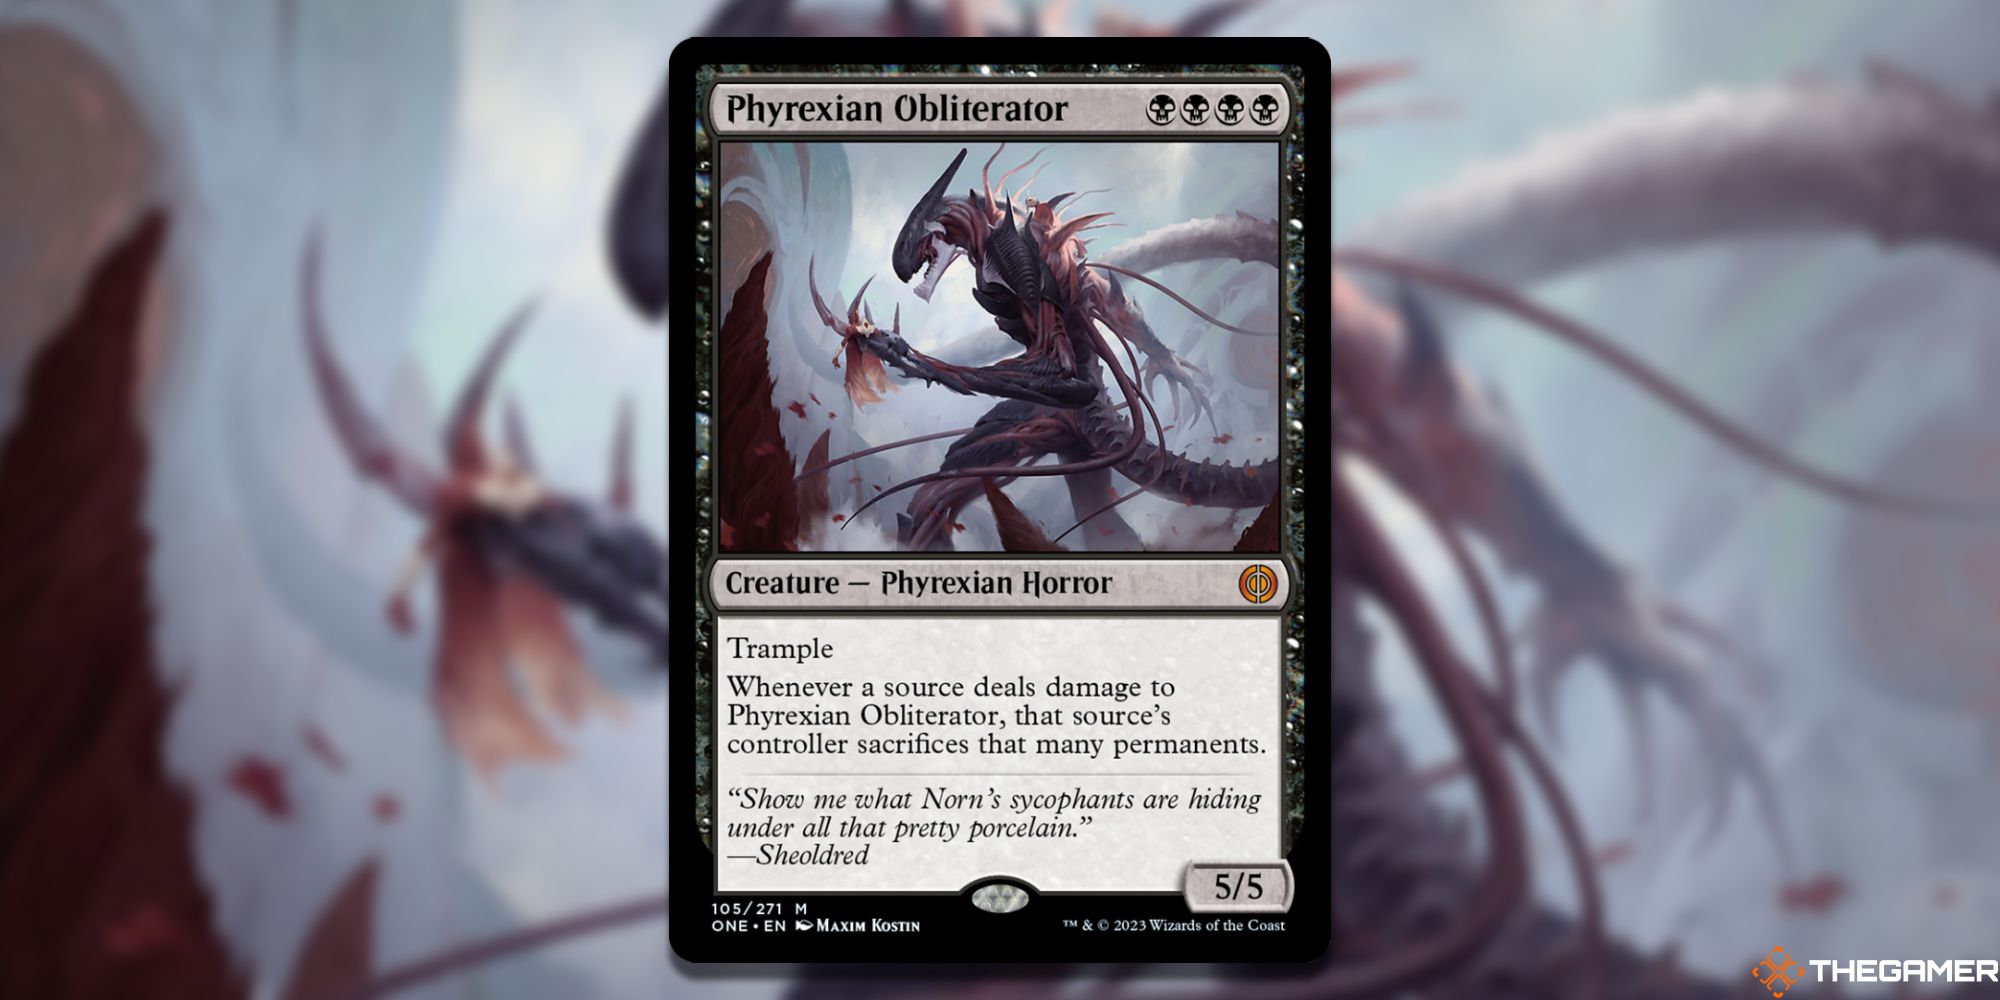 Image of the Phyrexian Obliterator card in Magic: The Gathering, with art by Maxim Kostin